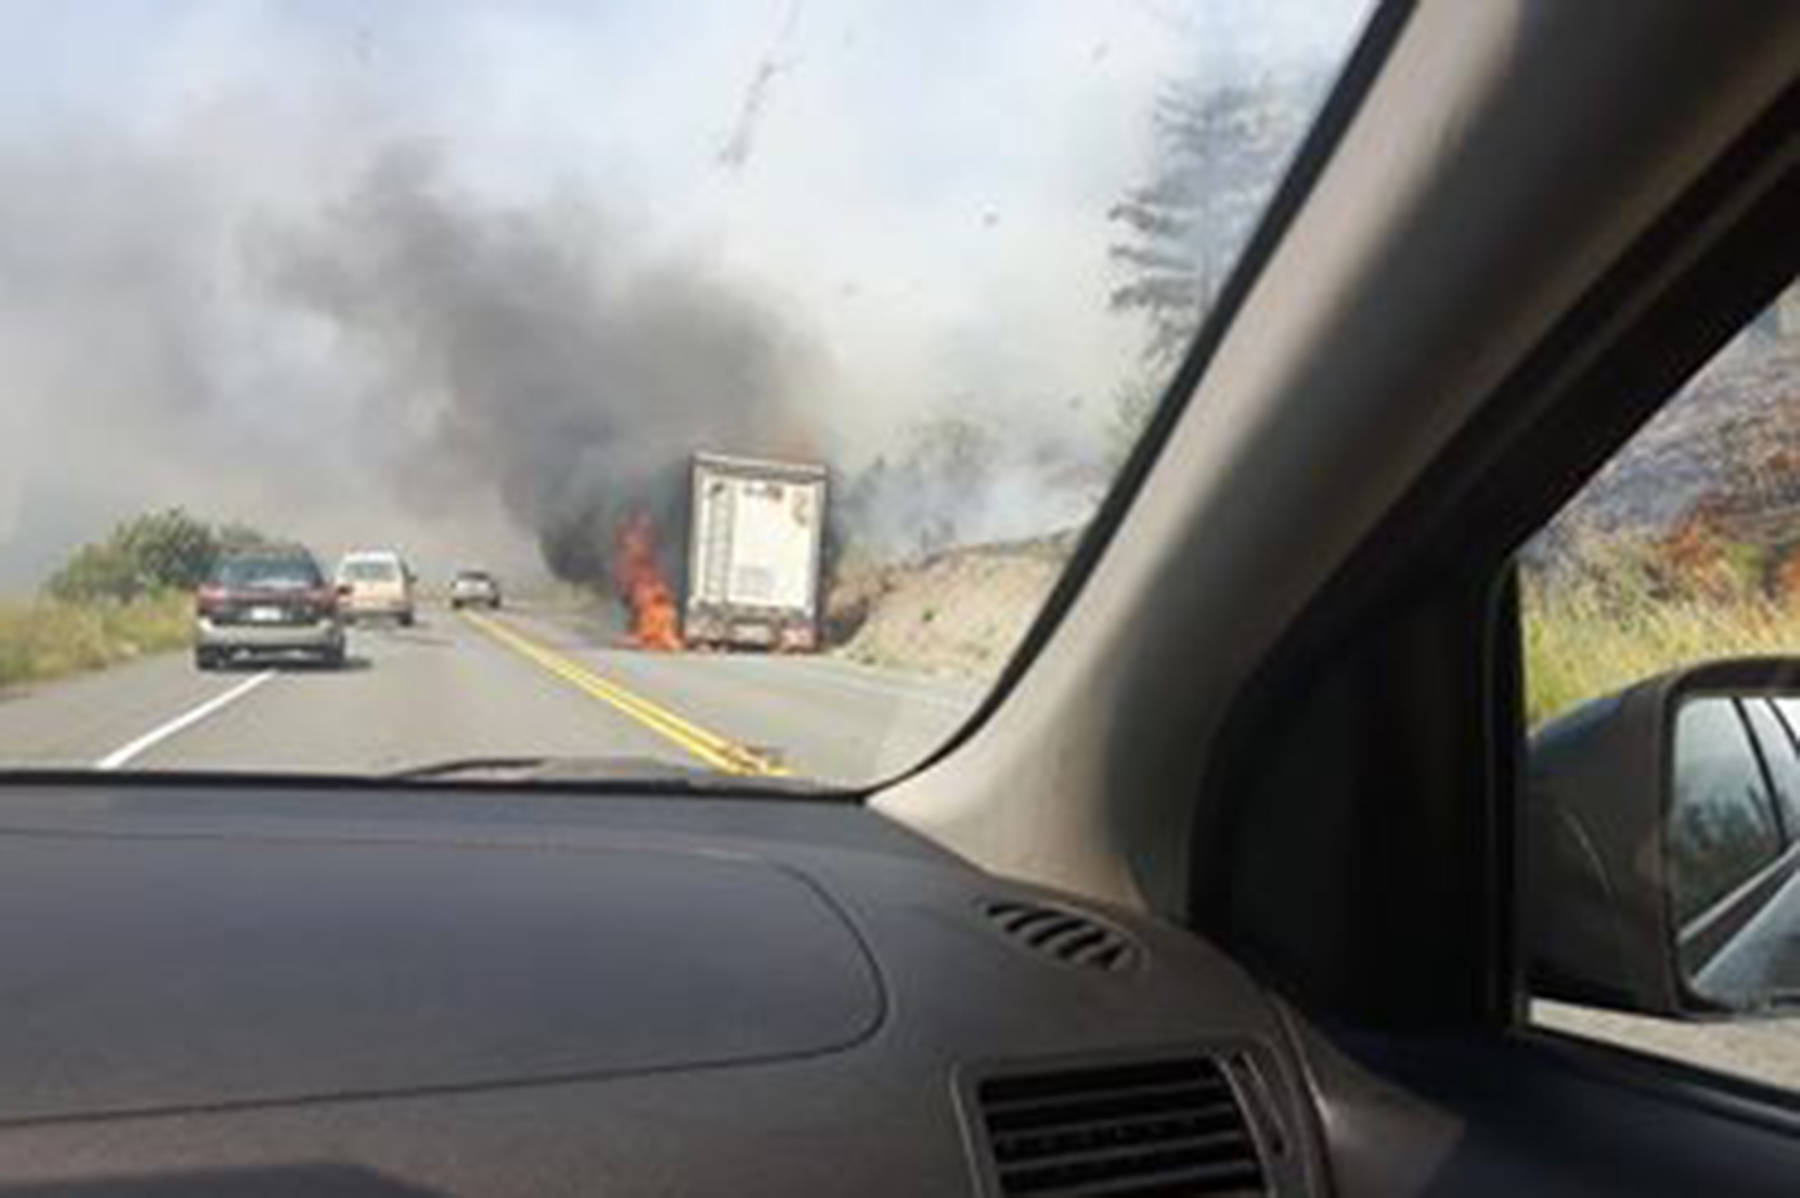 A transport fire has caused a grass fire just east of Hedley. (Trisha Coyne)